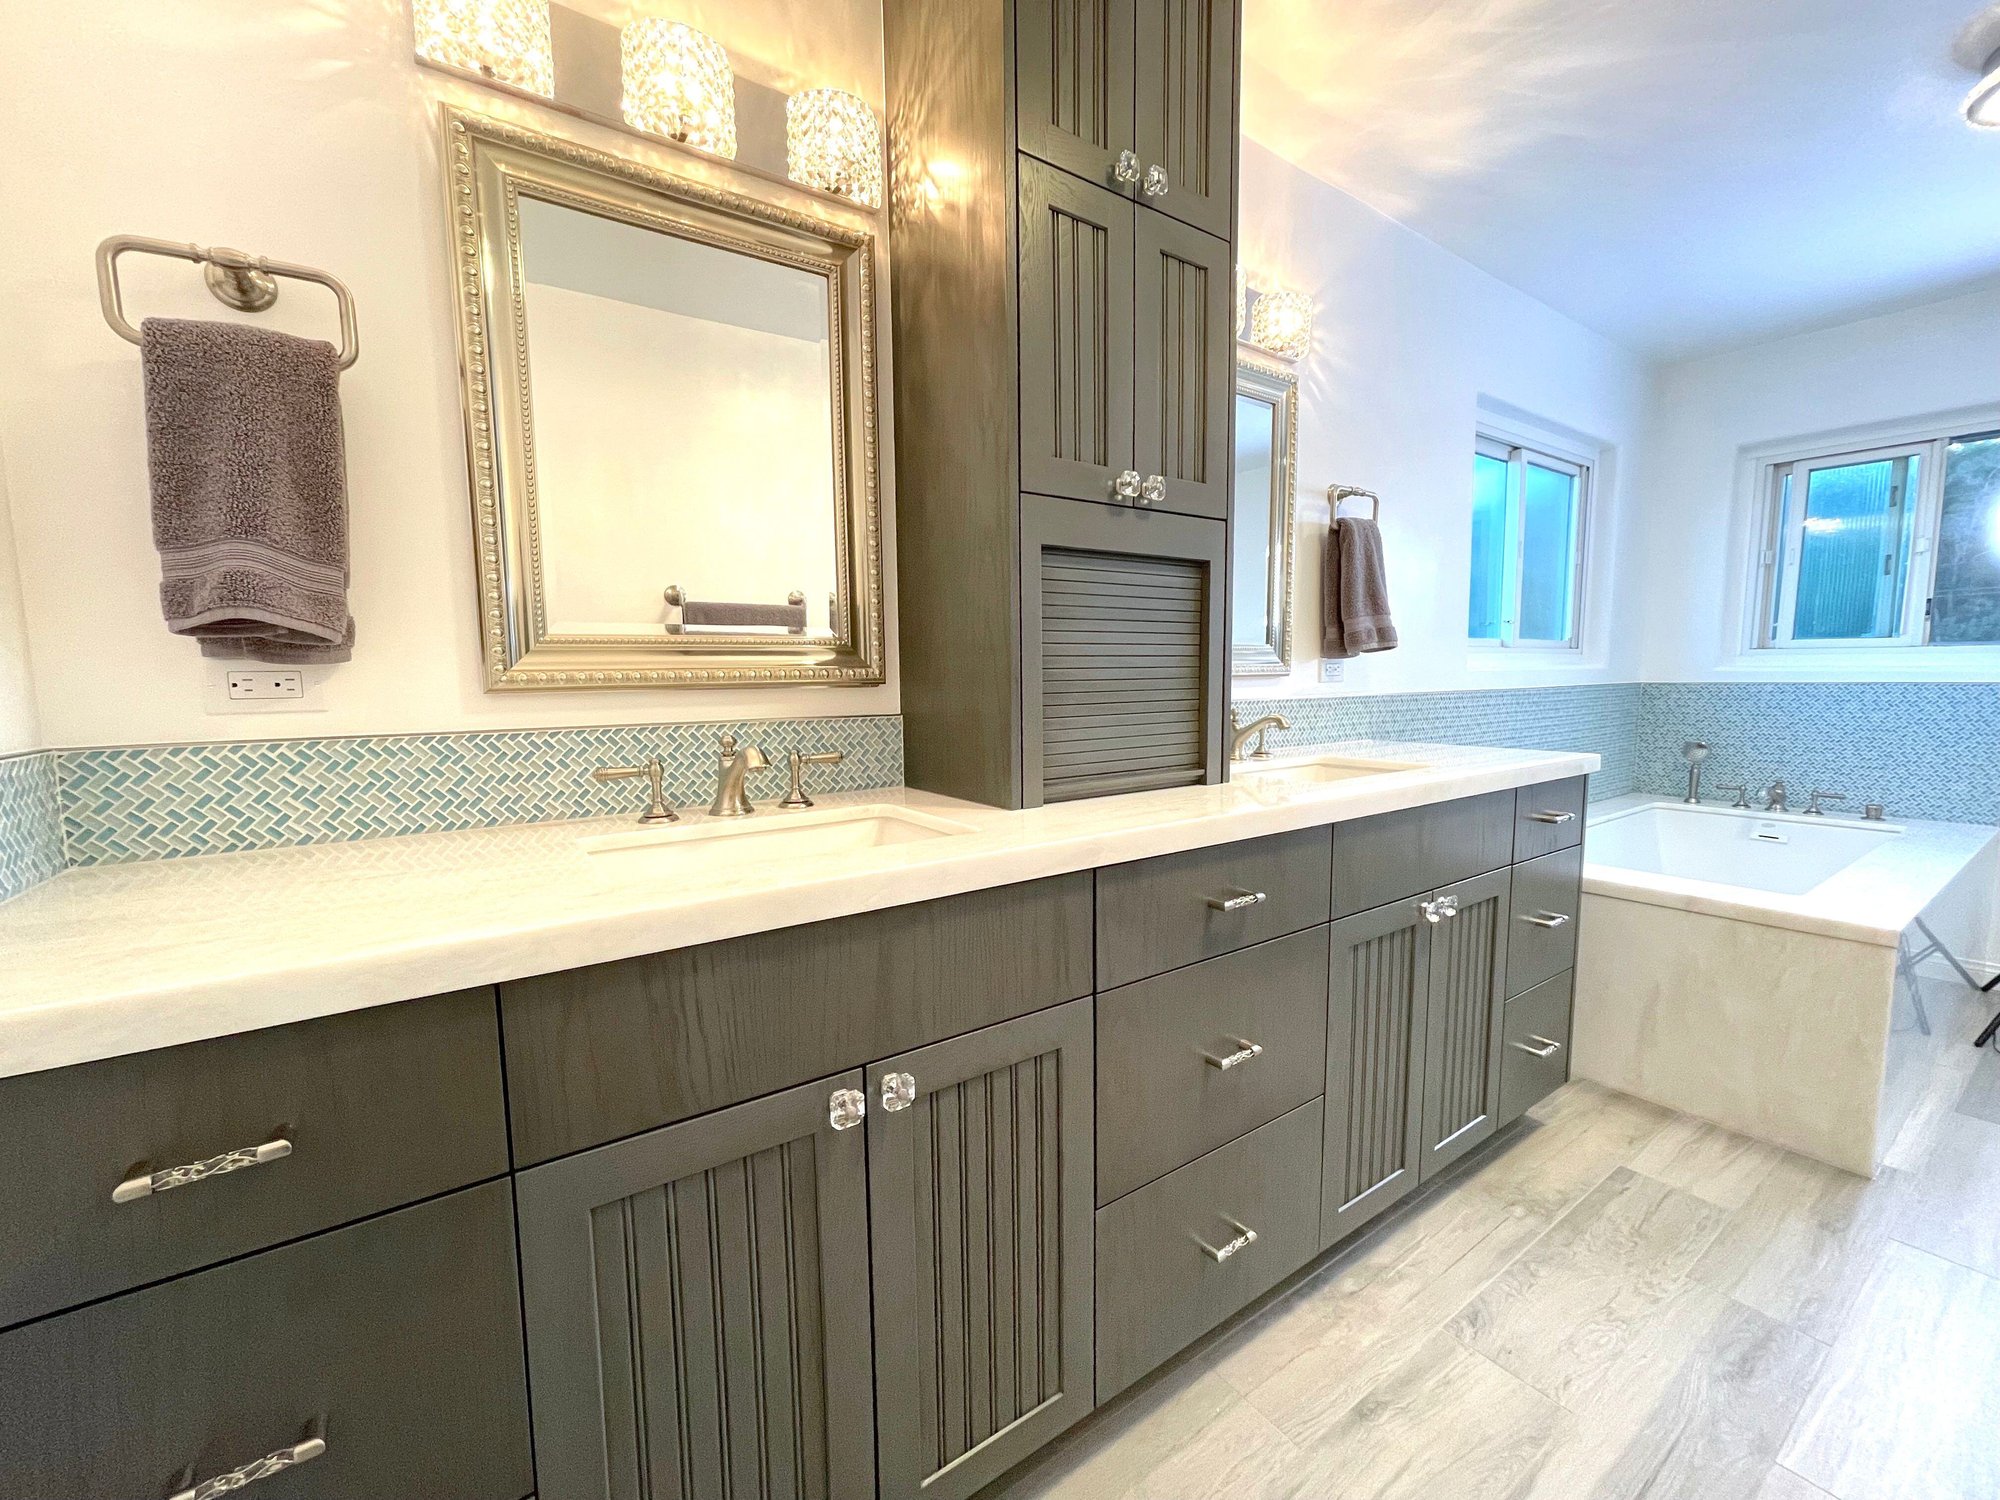 double vanity - Master bathroom remodel - best south bay - bay cities construction